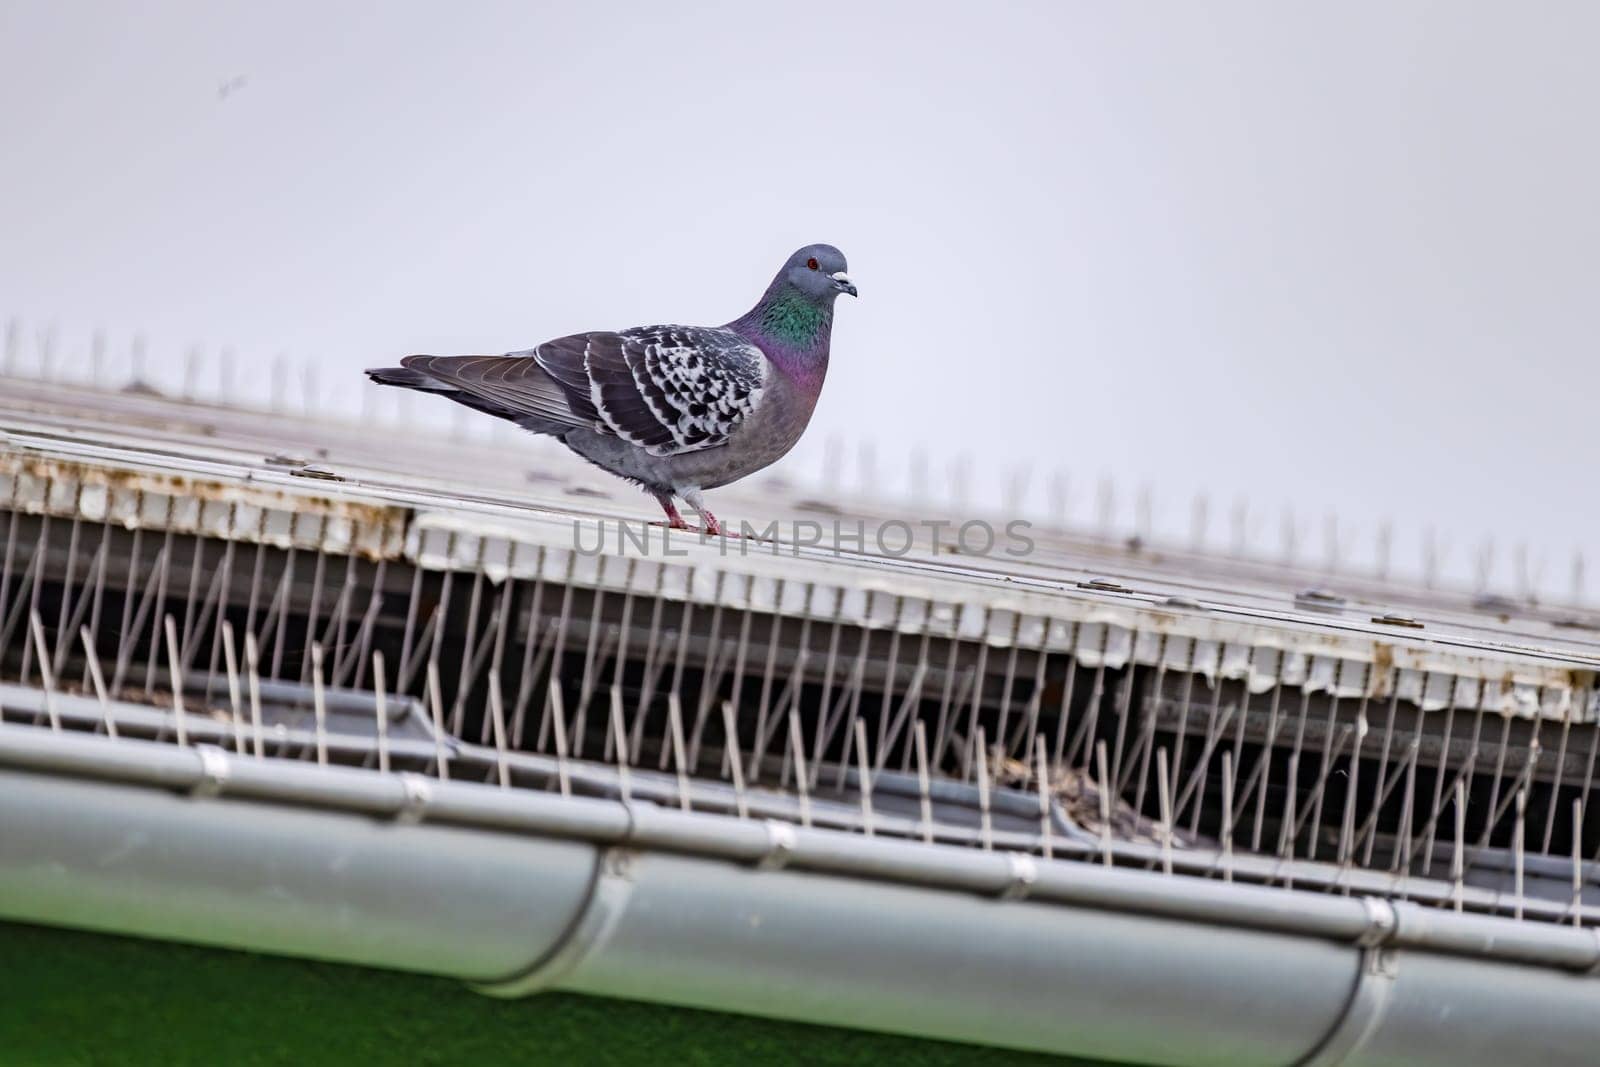 Pigeon on a roof with solar panels with pigeon spikes to repel pigeons, Darmstadt, Germany